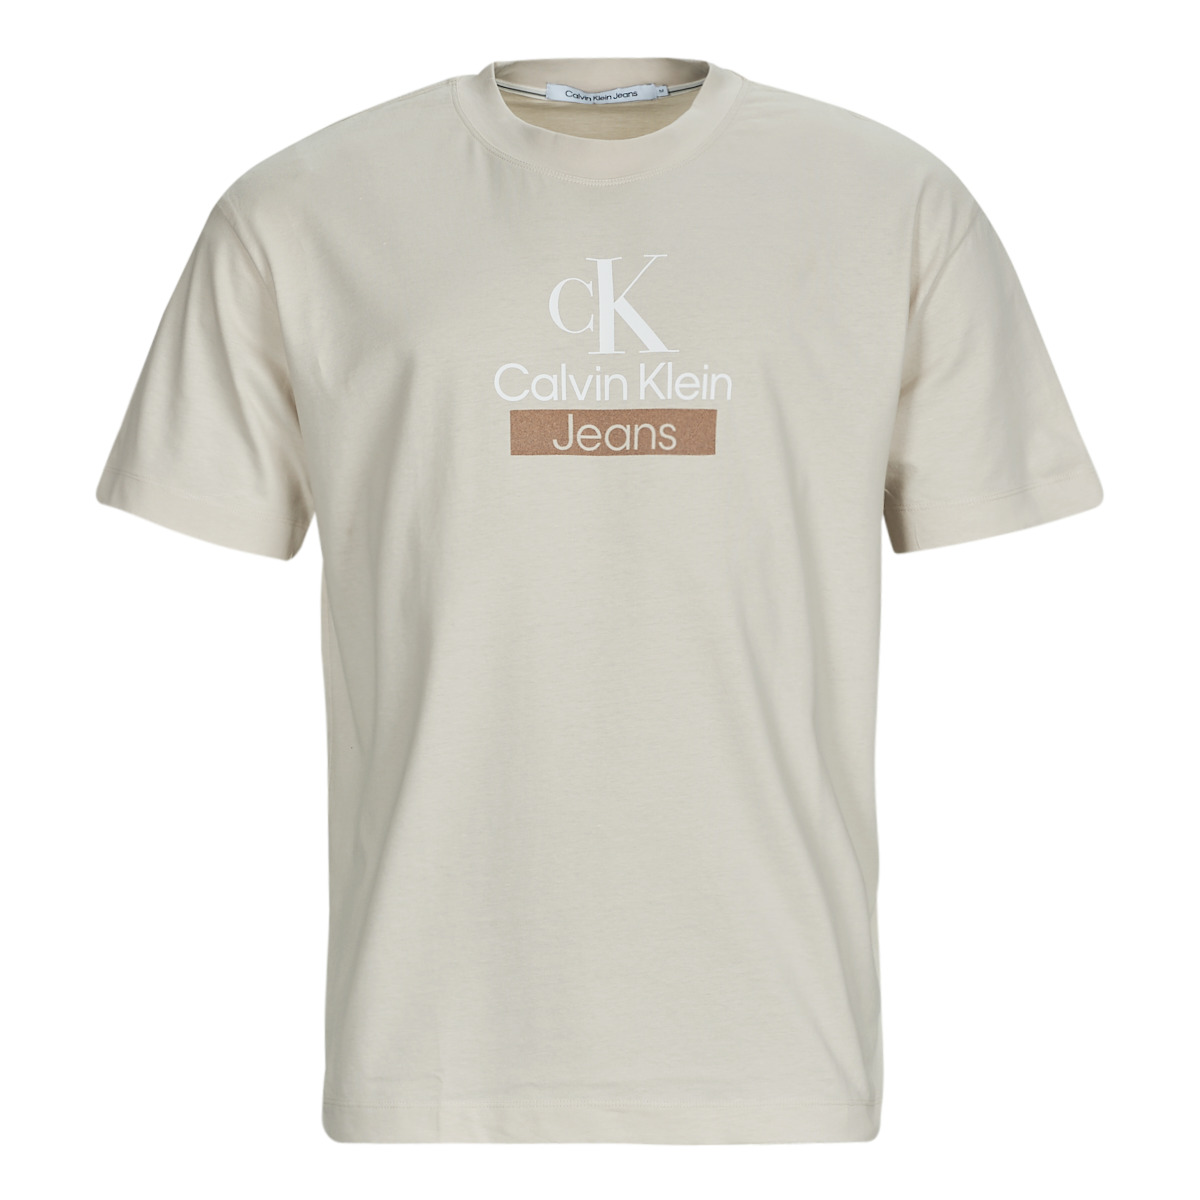 Calvin Klein - Jeans ARCHIVAL Clothing NET | - Men Spartoo TEE Free Beige short-sleeved STACKED delivery t-shirts 